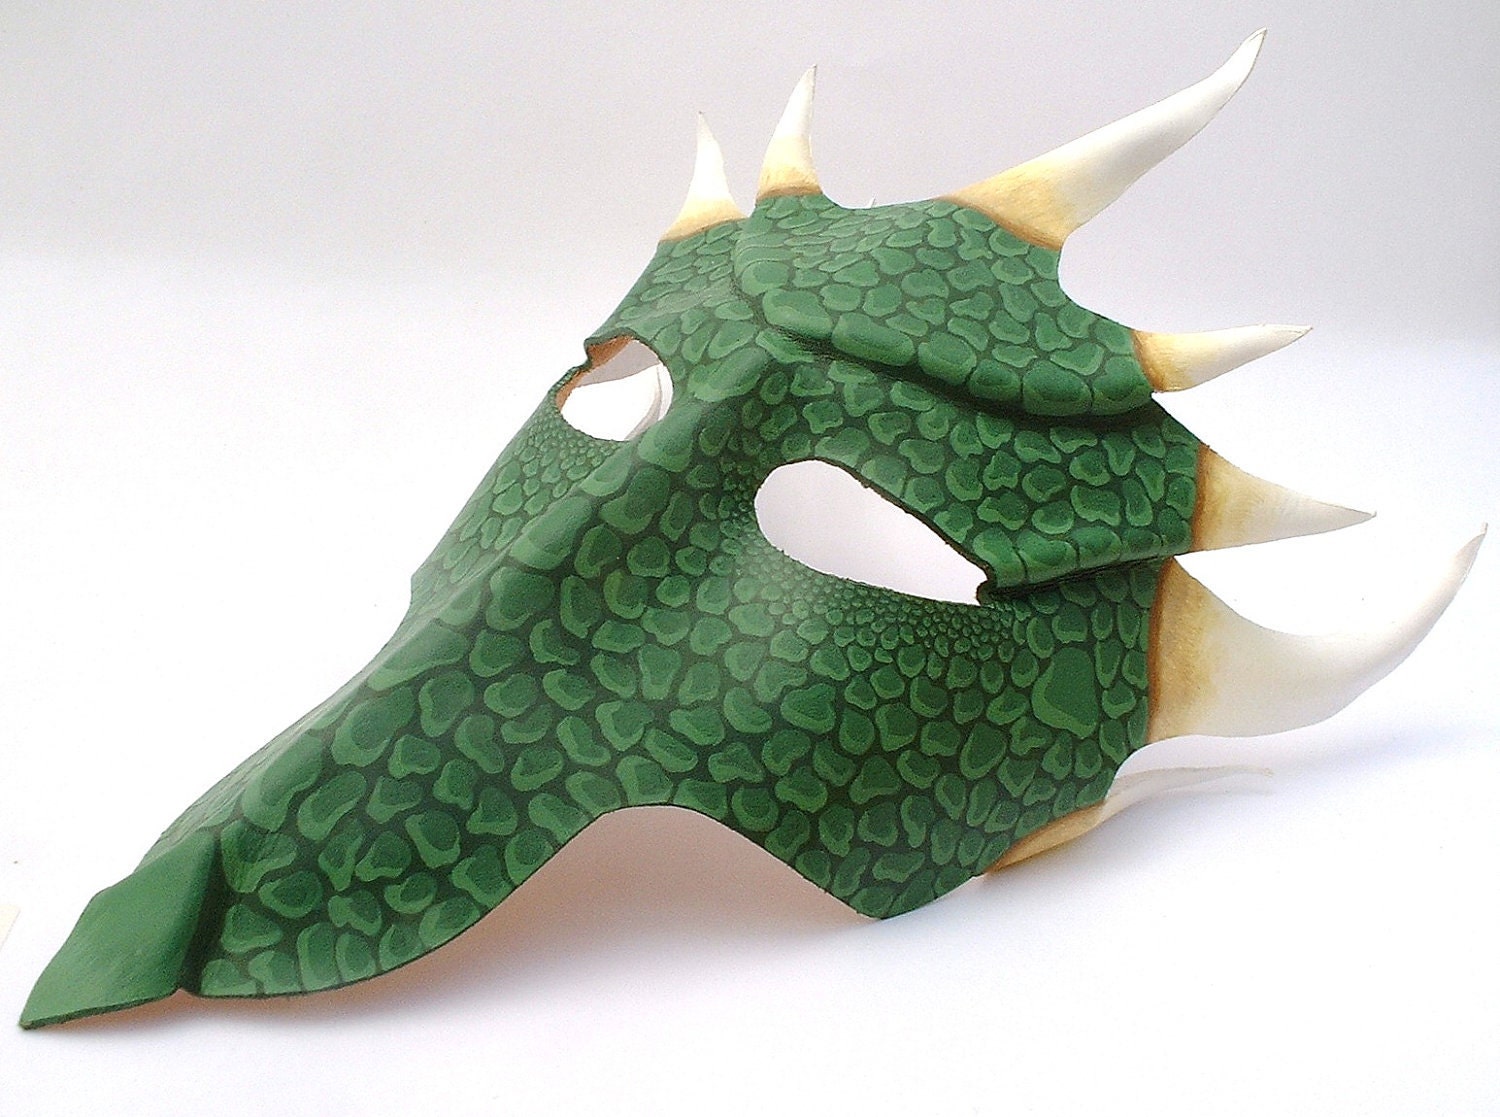 Womens Dragon Costume Accessory - Female Dragon Cosplay Eye Face Makeup - Green Dragon Halloween Costume Mask - Adult Mermaid Costume Scales